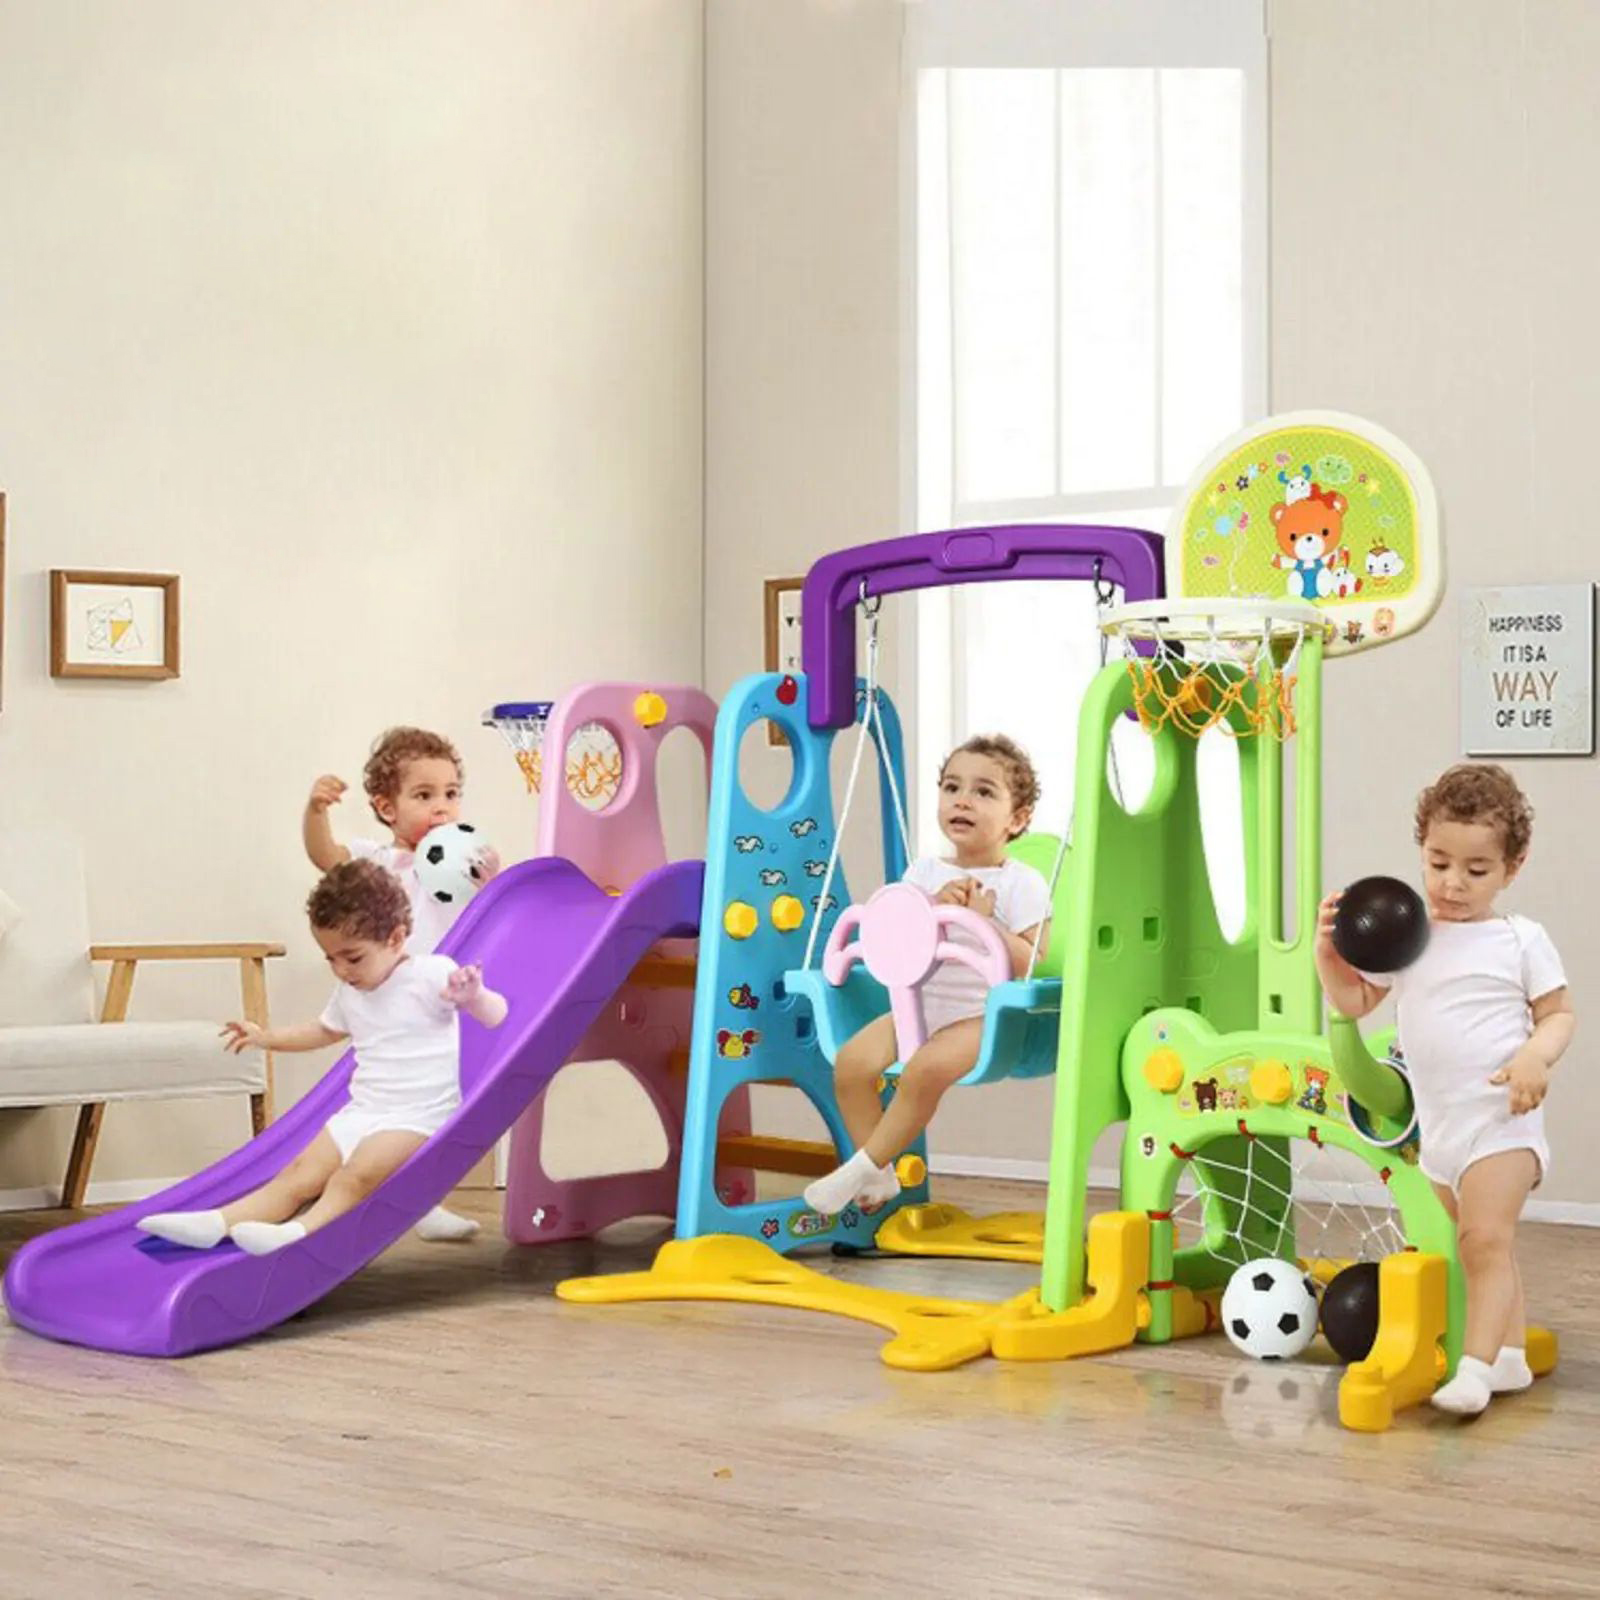 Premium 6-In-1 Toddler Slide And Swing Playsets For Indoor Outdoor